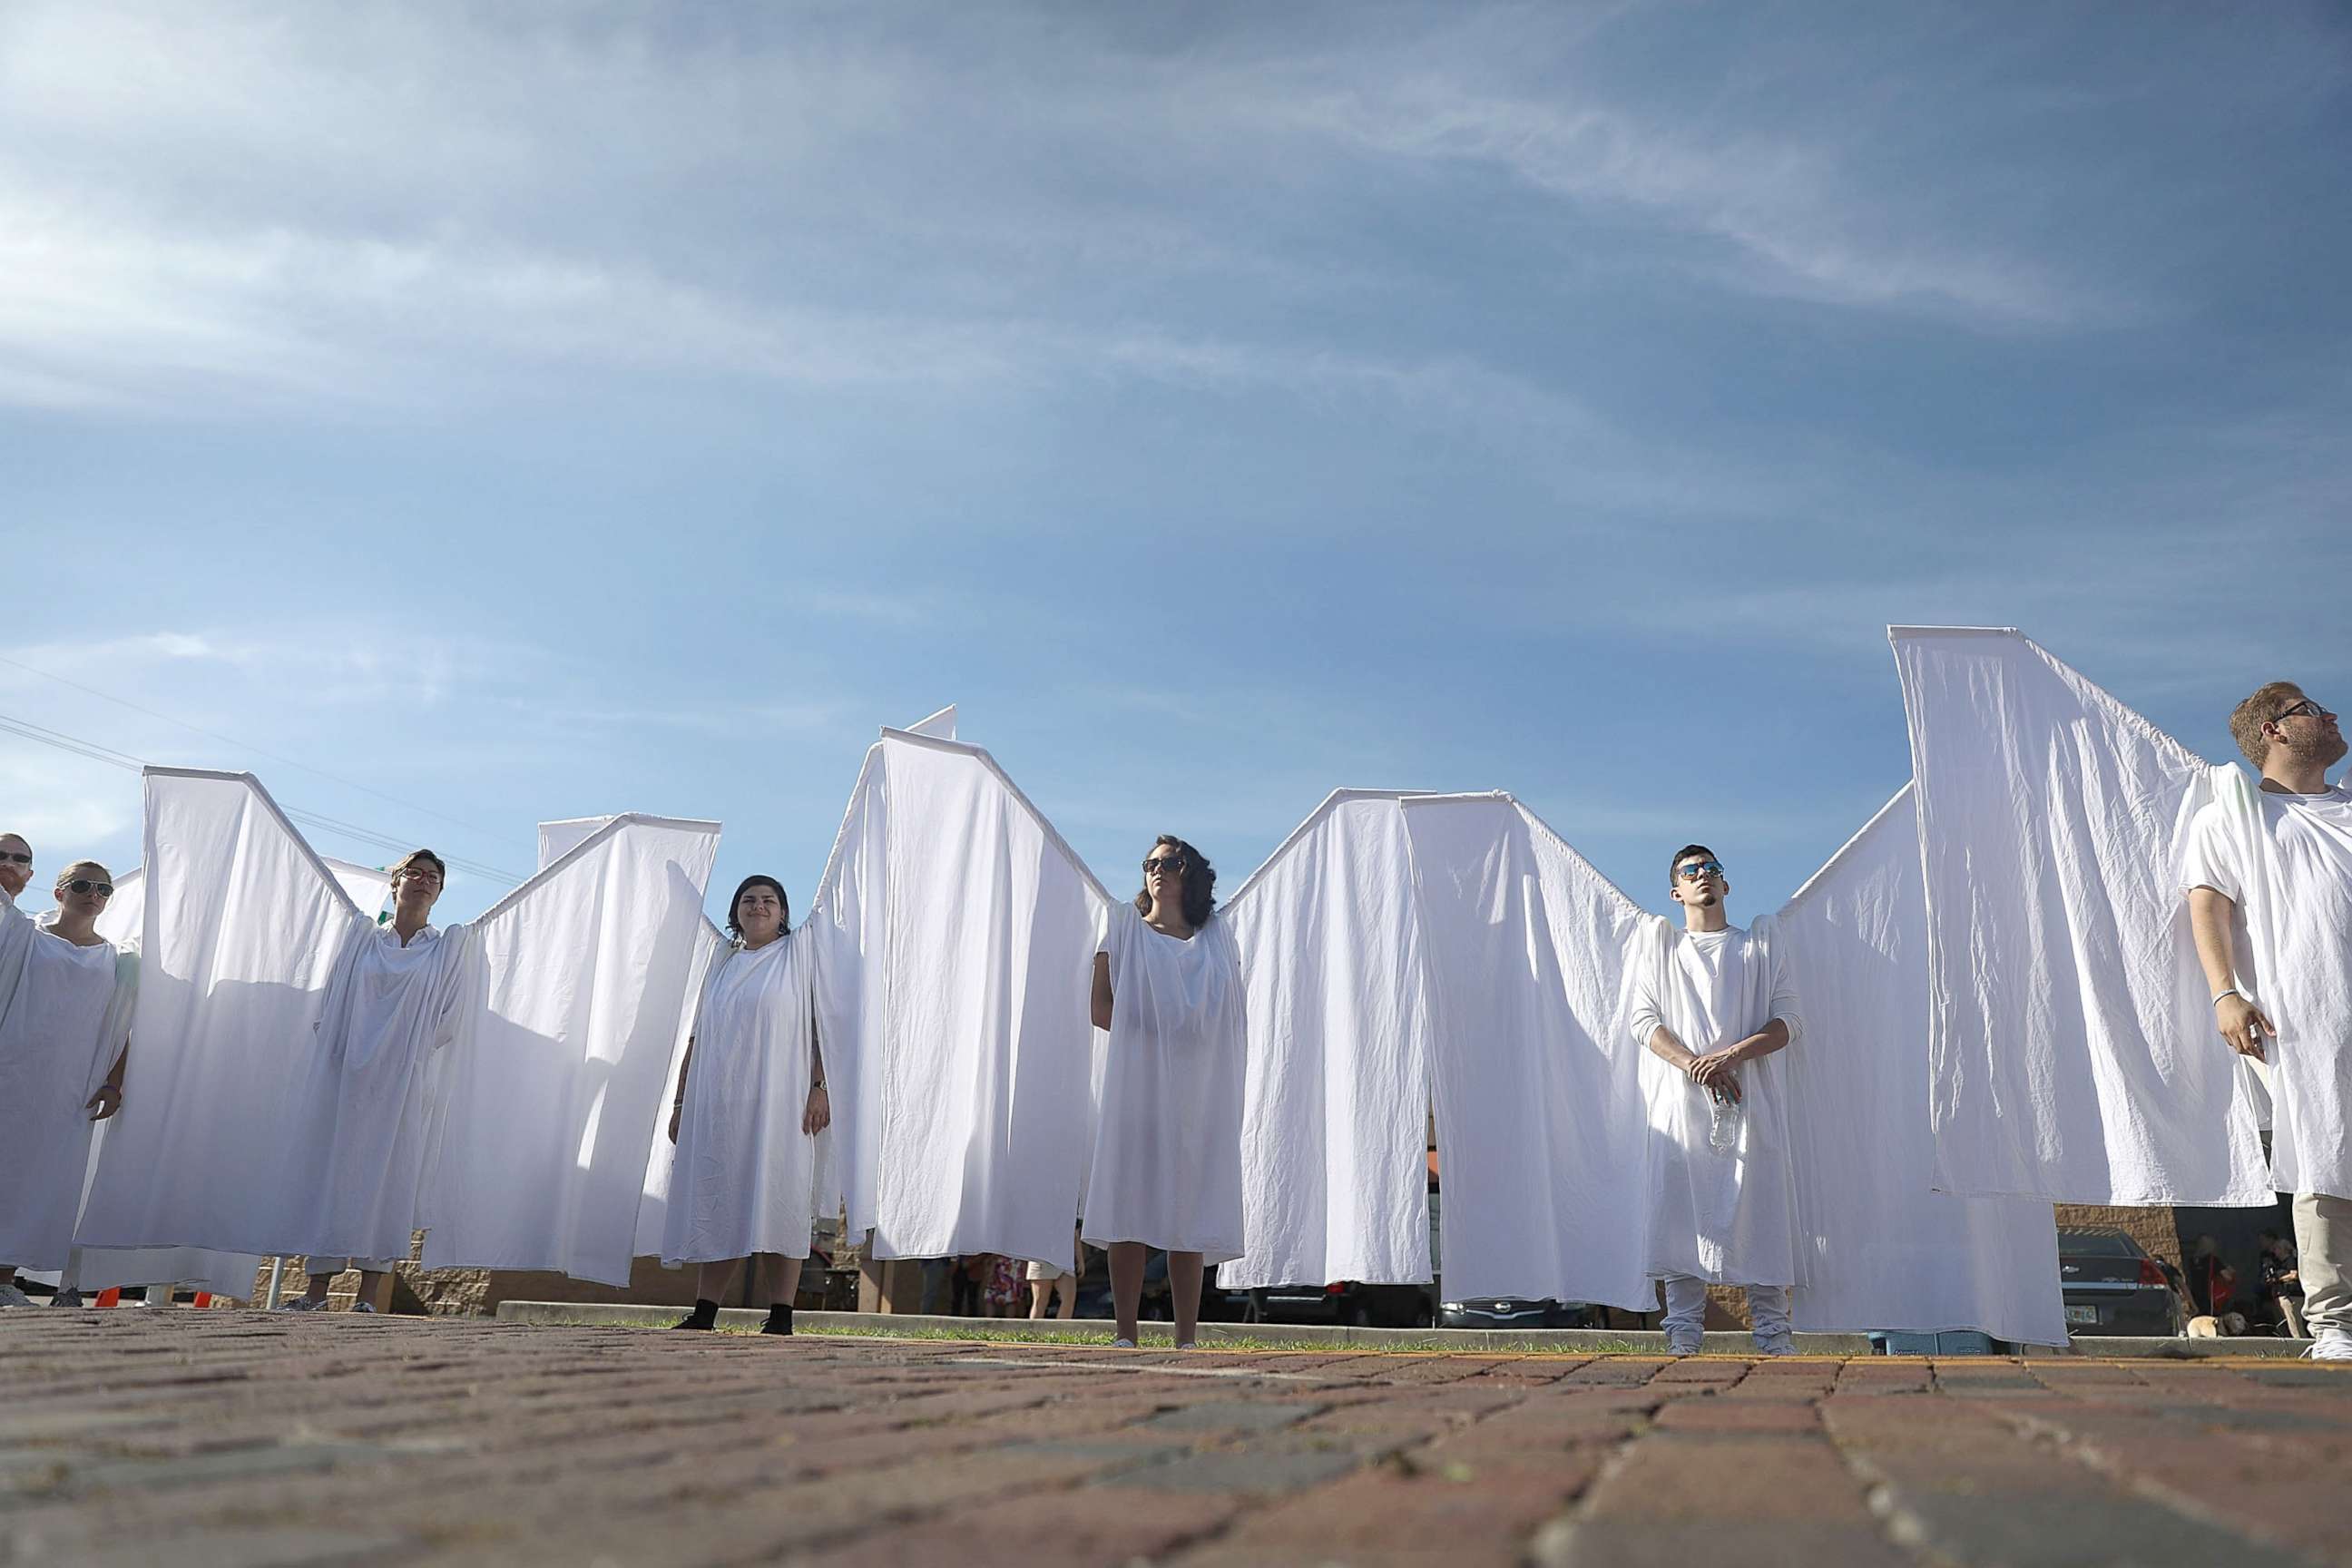 PHOTO: People dressed as angels stand in front of the memorial set up for the shooting victims at Pulse nightclub where the shootings took place two years ago, June 12, 2018, in Orlando, Fla.